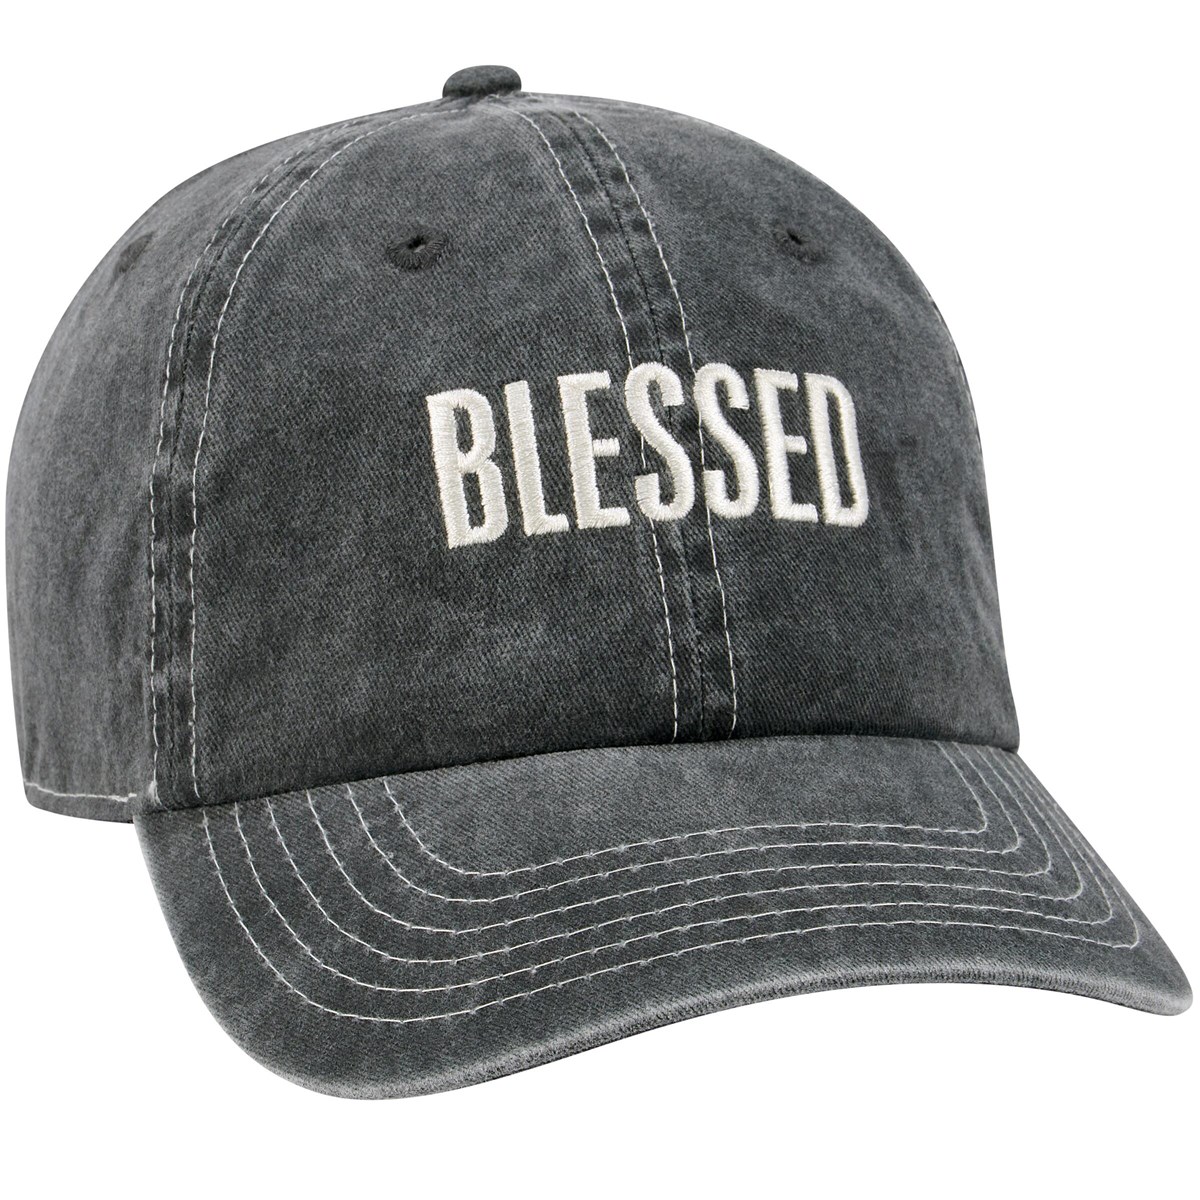 Blessed Baseball Cap | Primitives By Kathy